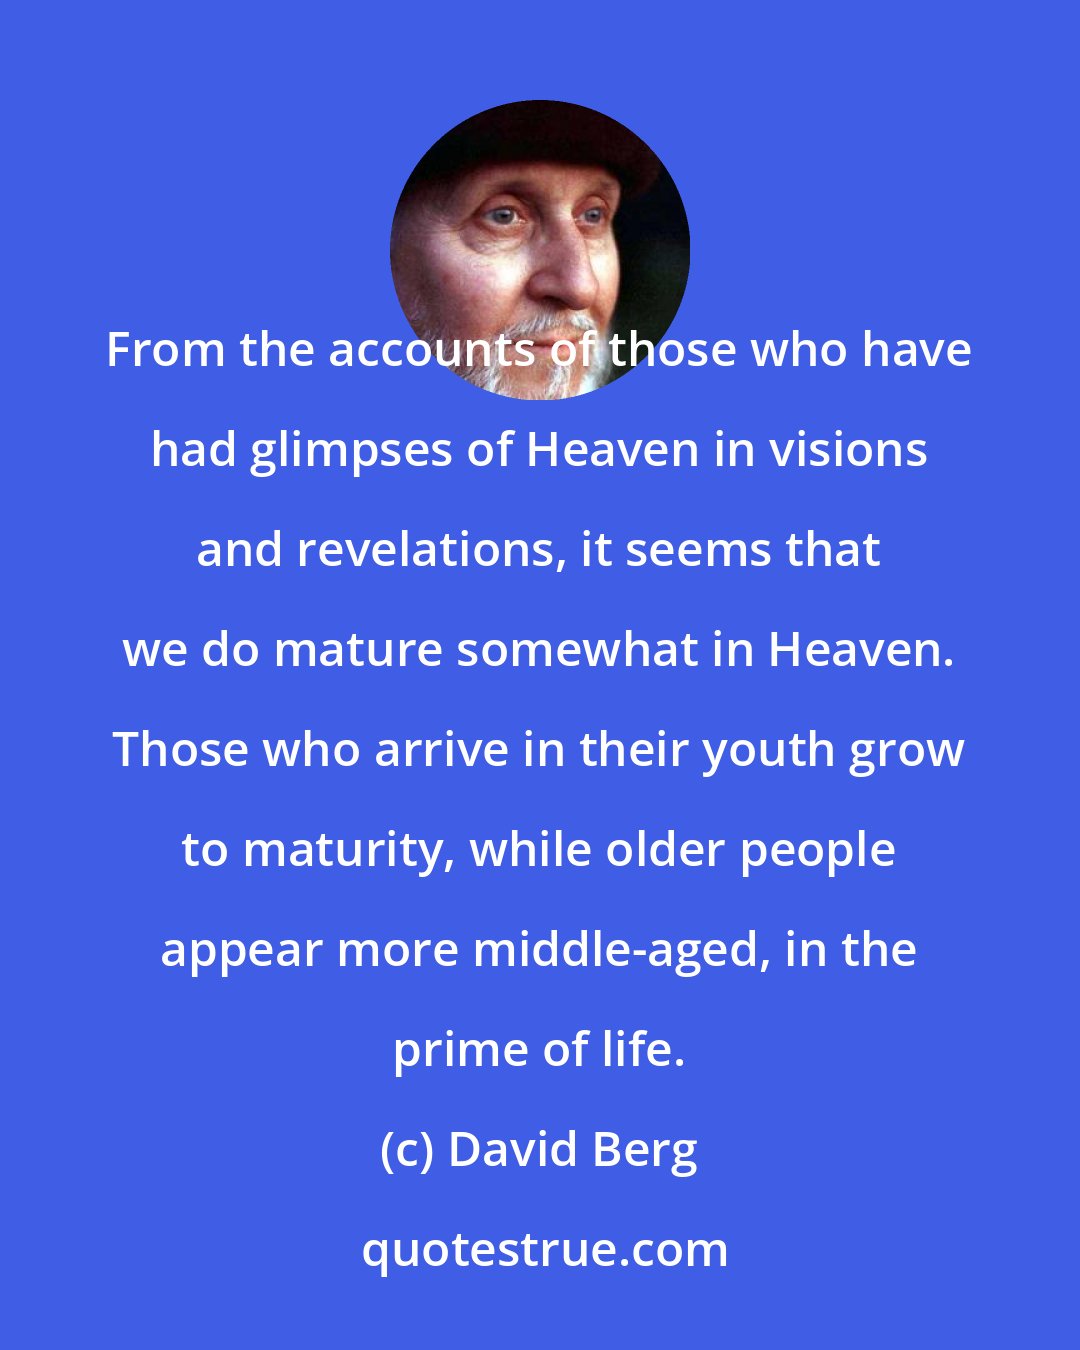 David Berg: From the accounts of those who have had glimpses of Heaven in visions and revelations, it seems that we do mature somewhat in Heaven. Those who arrive in their youth grow to maturity, while older people appear more middle-aged, in the prime of life.